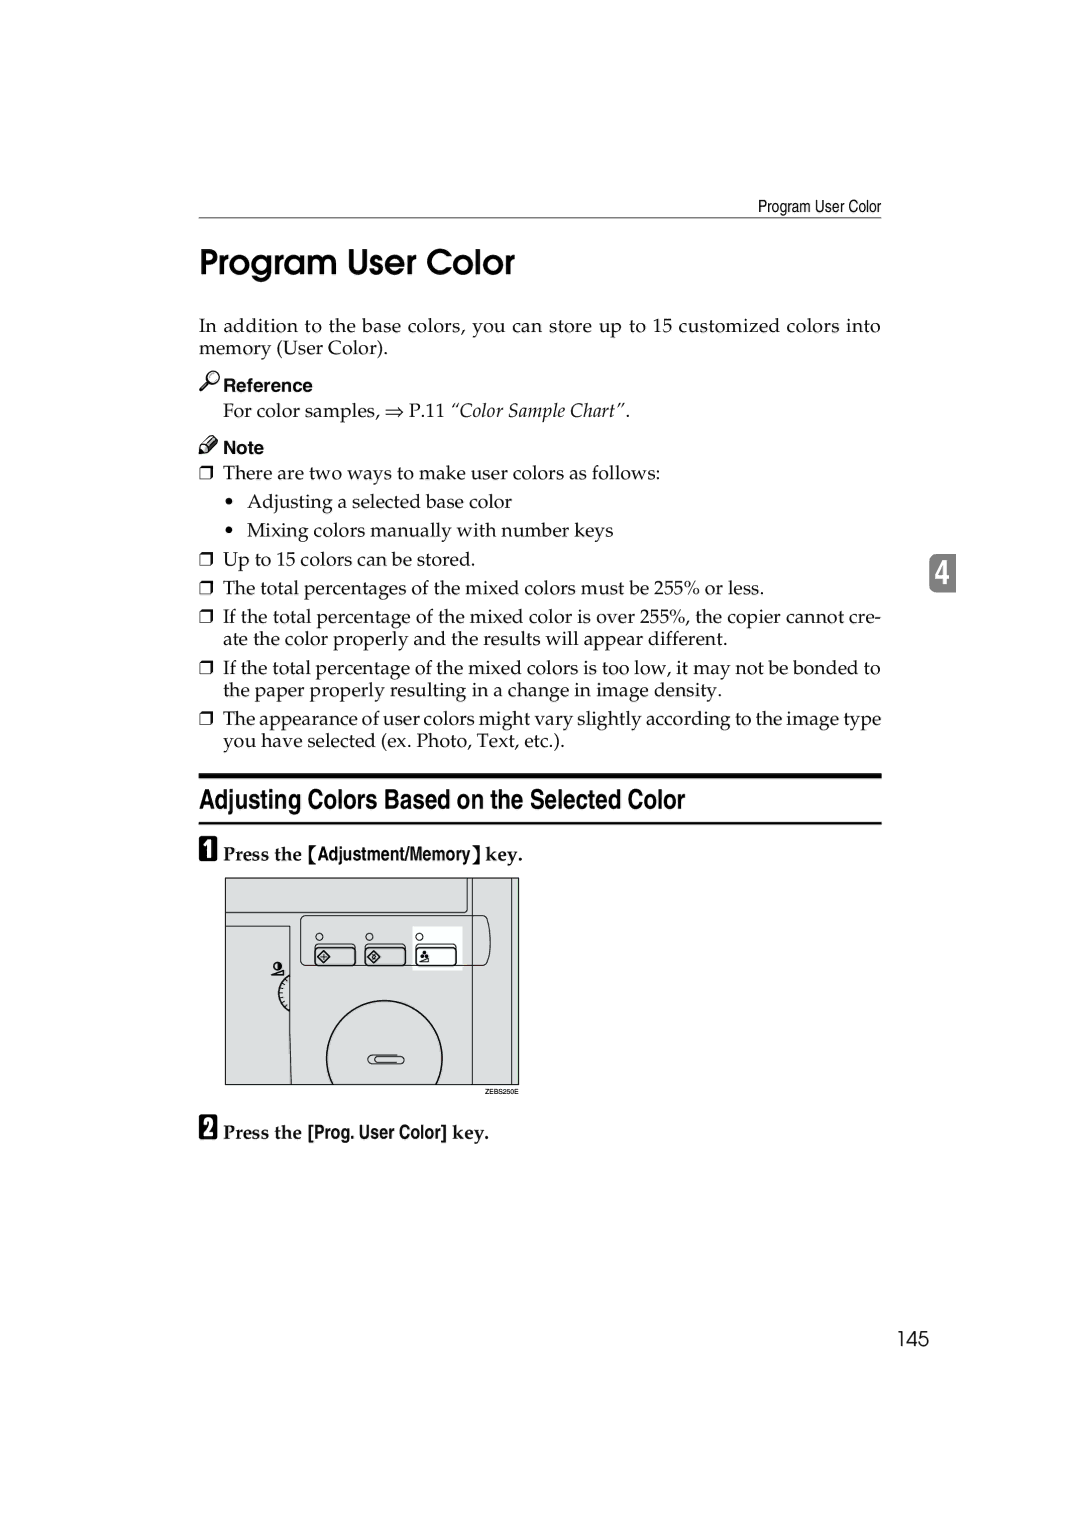 Ricoh 6513 manual Program User Color, Adjusting Colors Based on the Selected Color, 145 